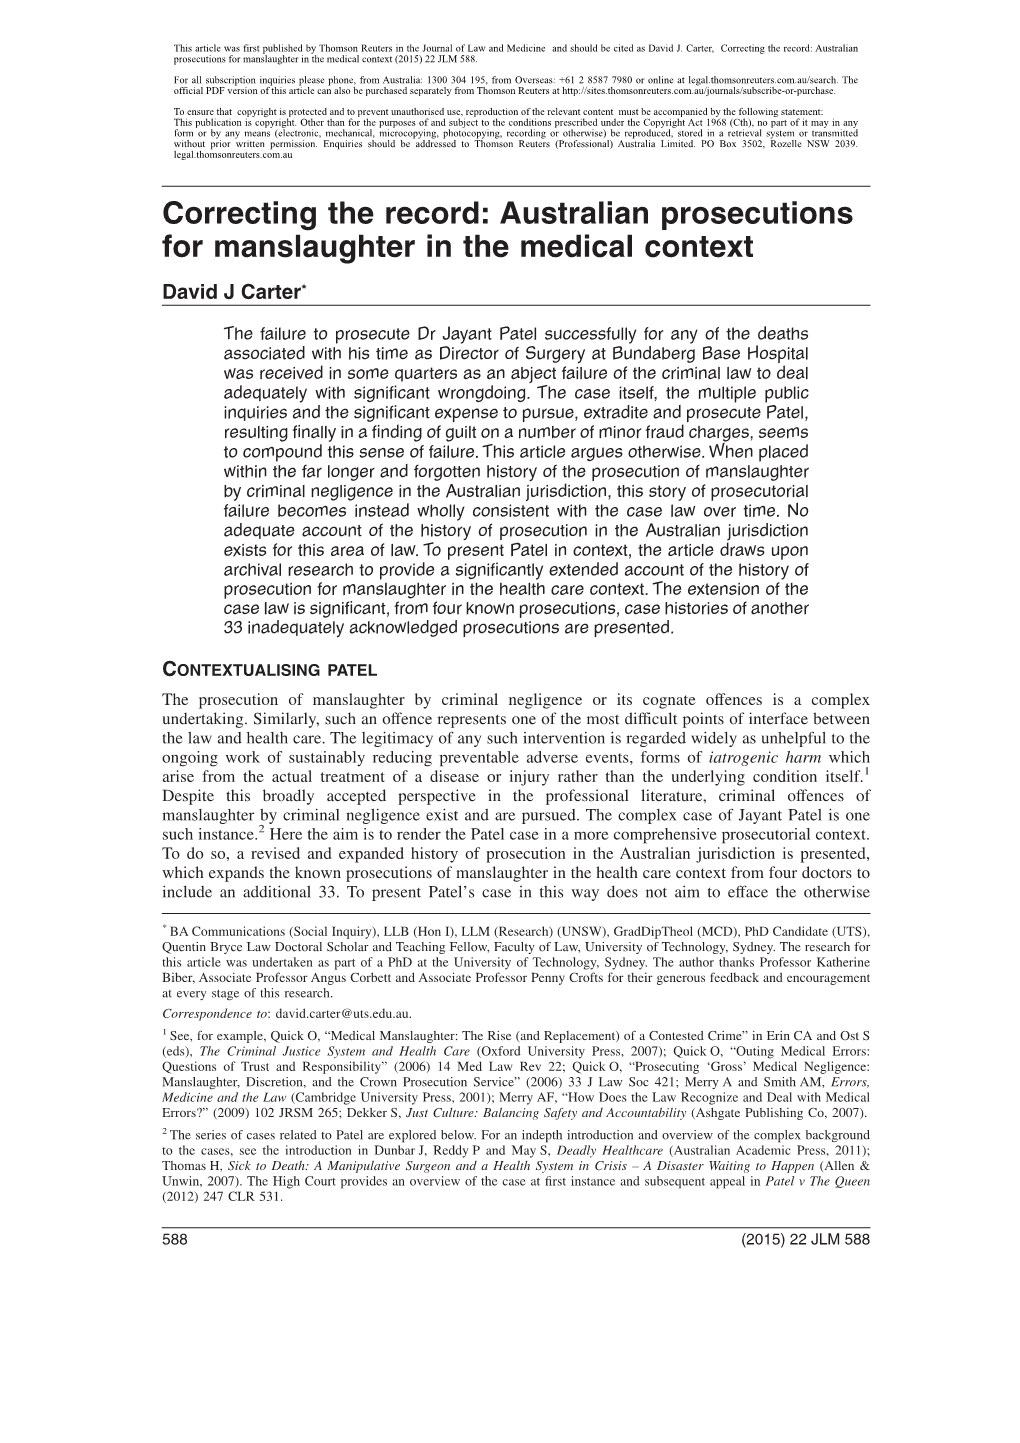 Australian Prosecutions for Manslaughter in the Medical Context